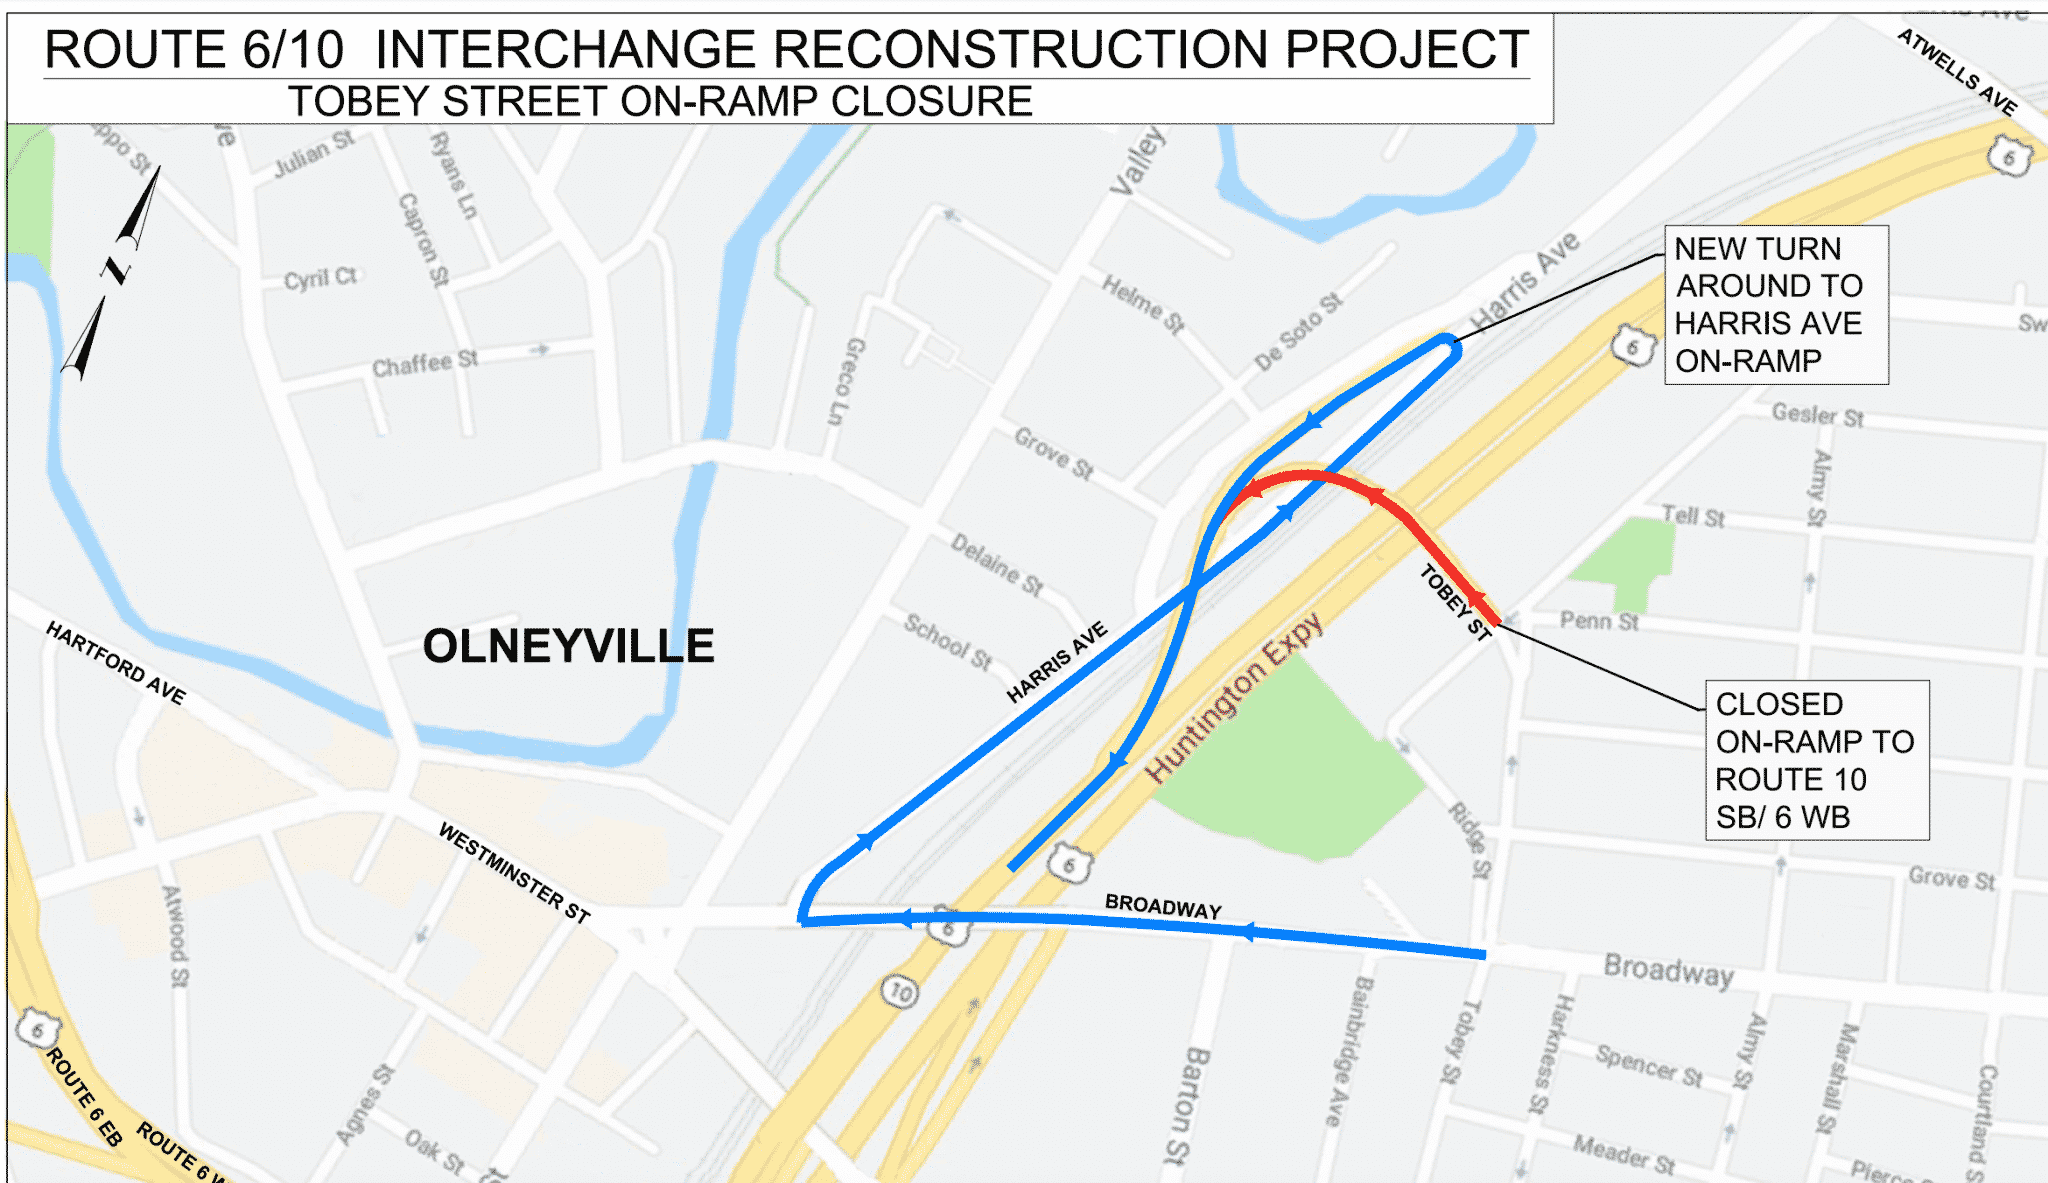 [CREDIT: RIDOT] RIDOT) will permanently close the Tobey Street on-ramp to Rte. 6 West in Providence on Tuesday, Feb. 18.